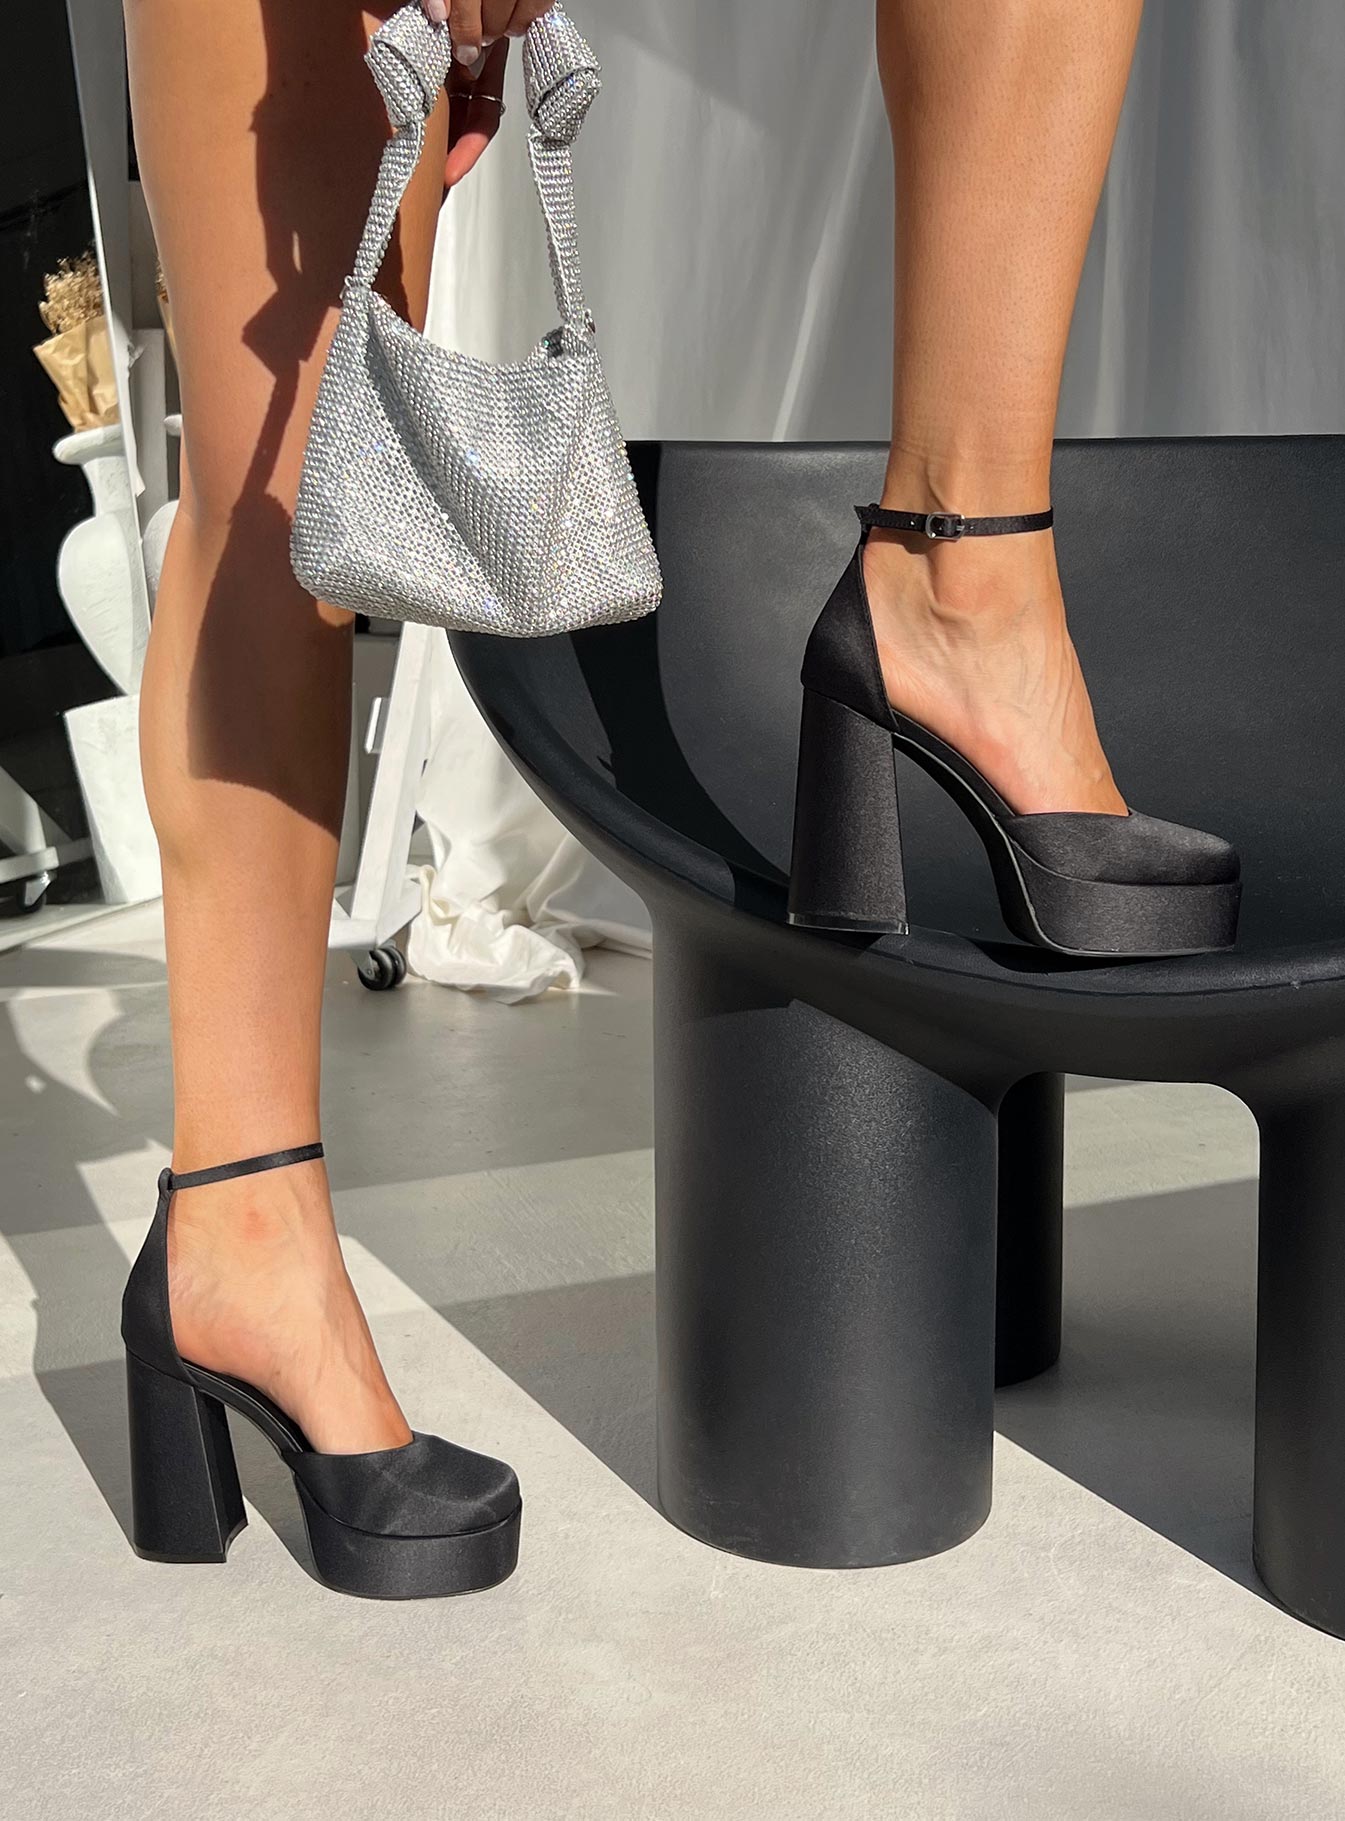 Ways to Make High Heels Less Painful and More Comfortable